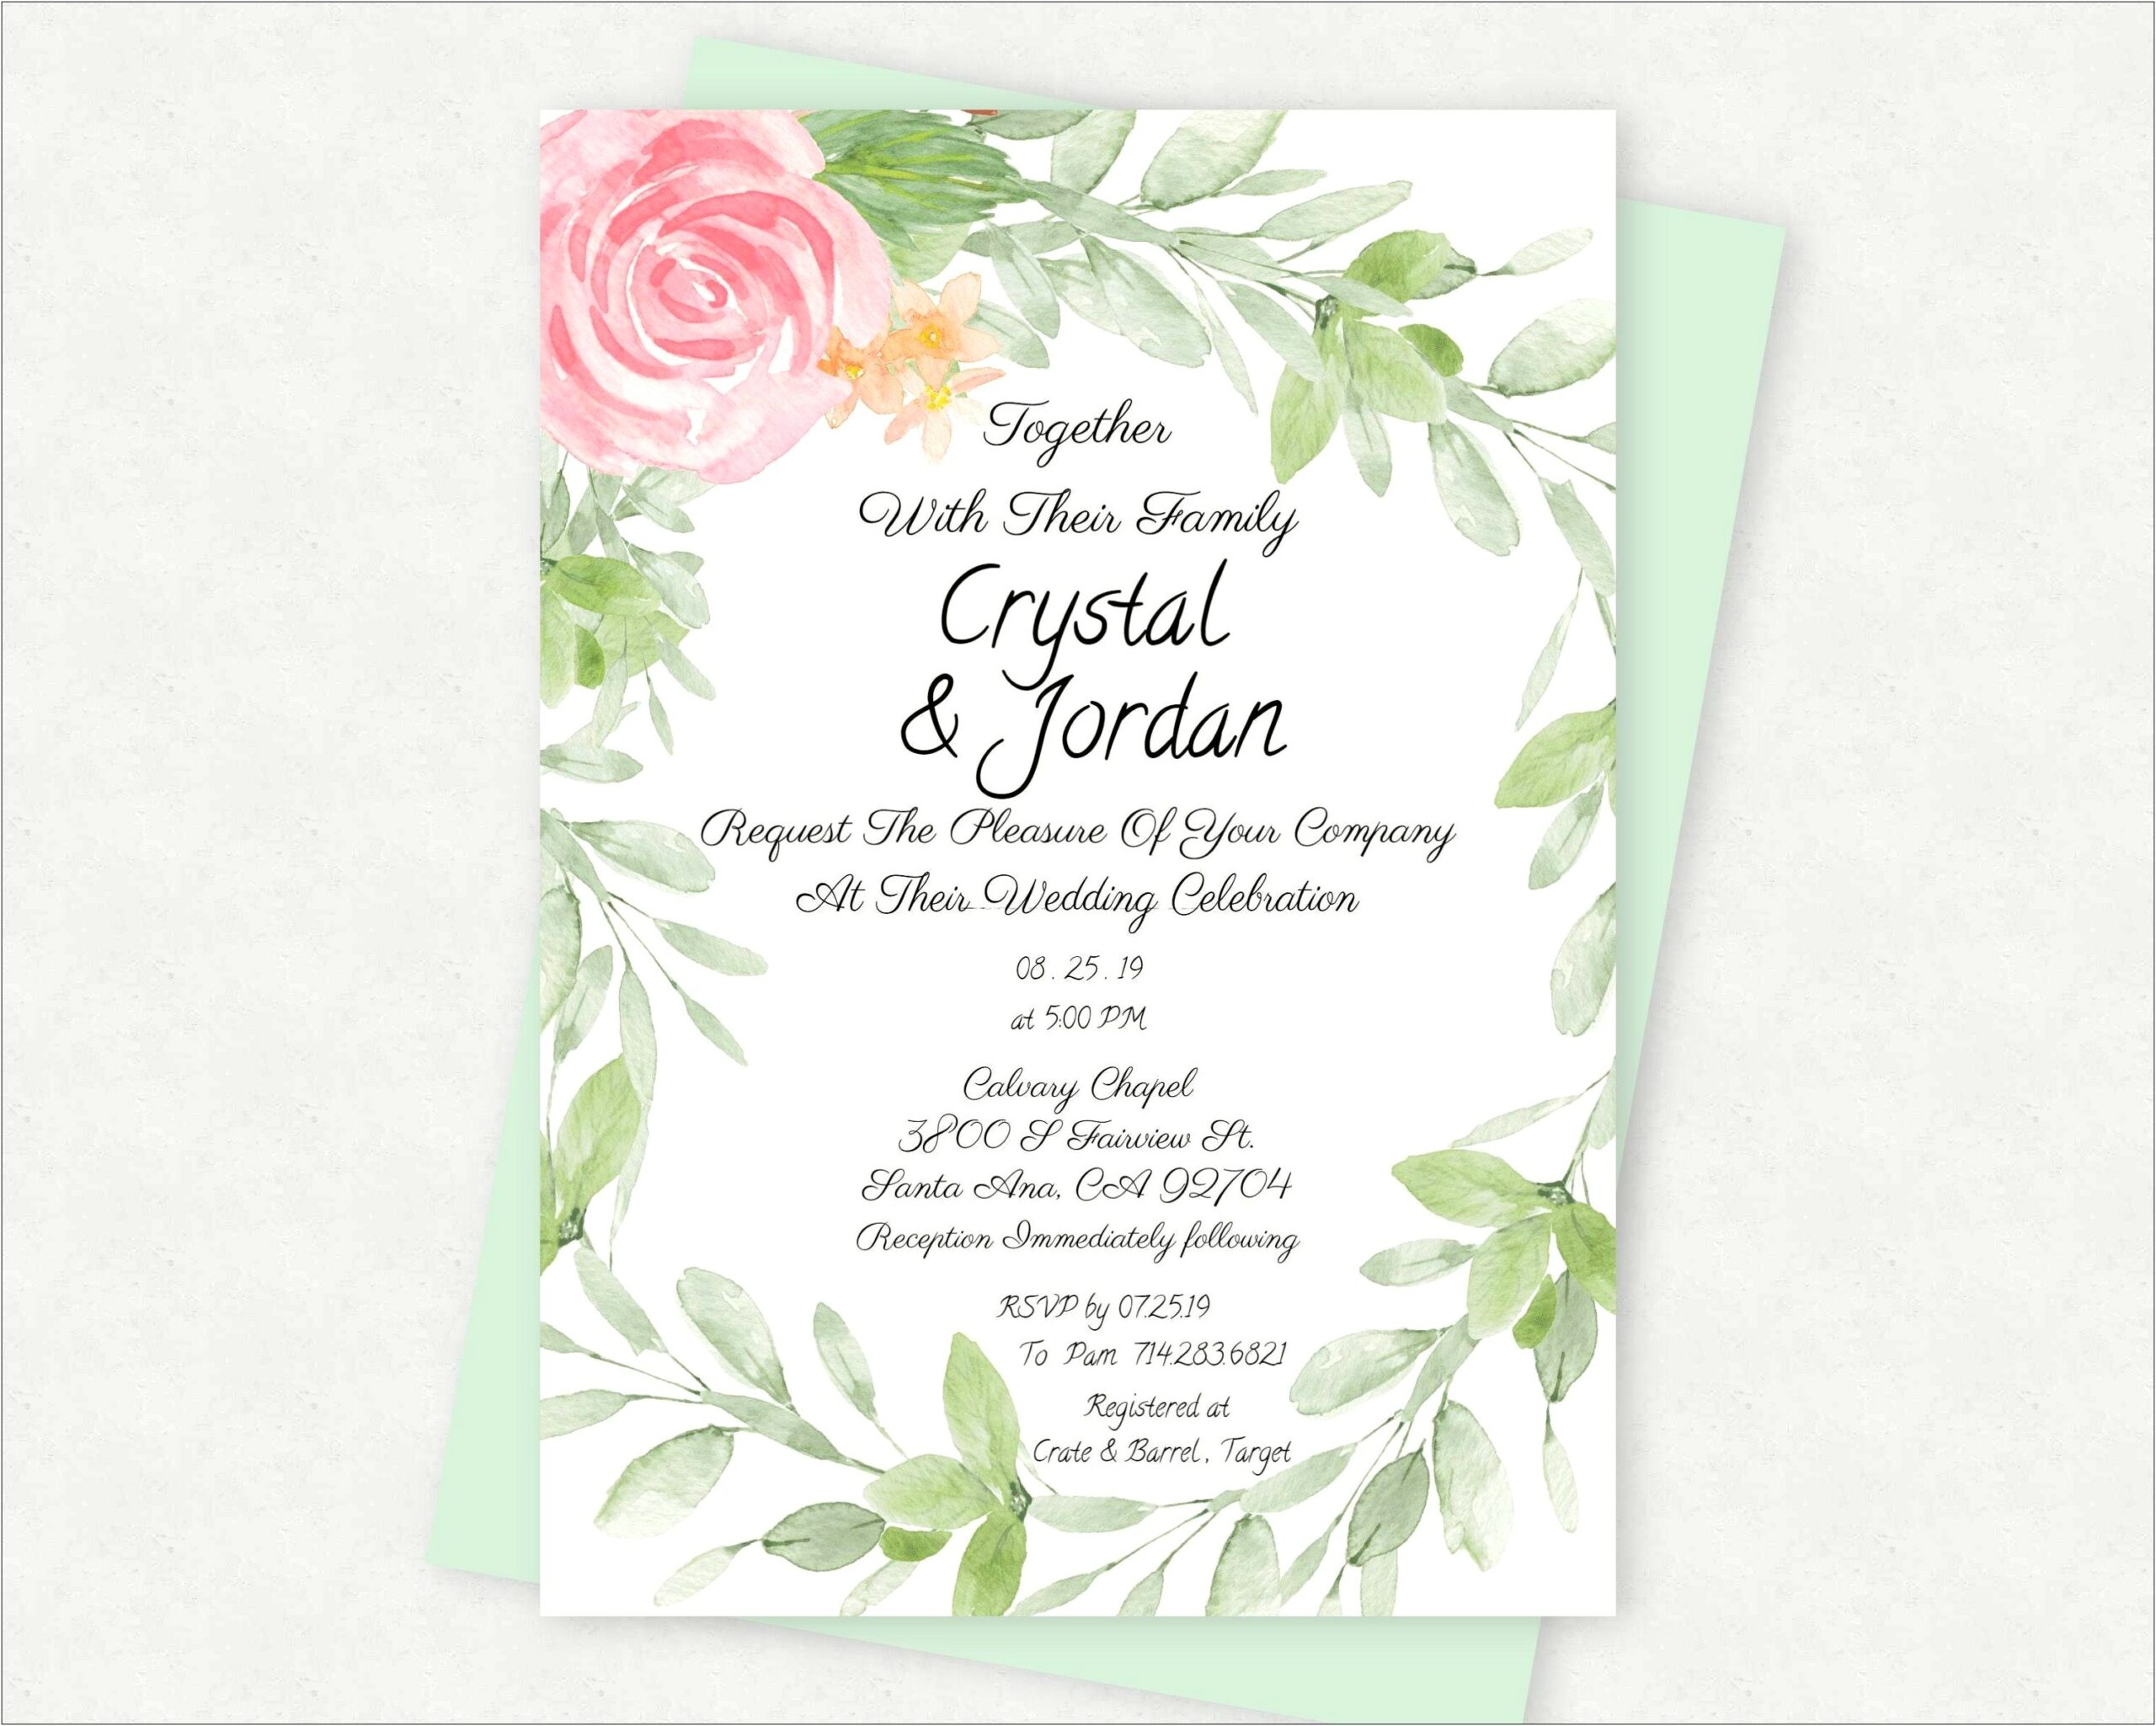 Floral Wedding Invitation Card Template Free Download